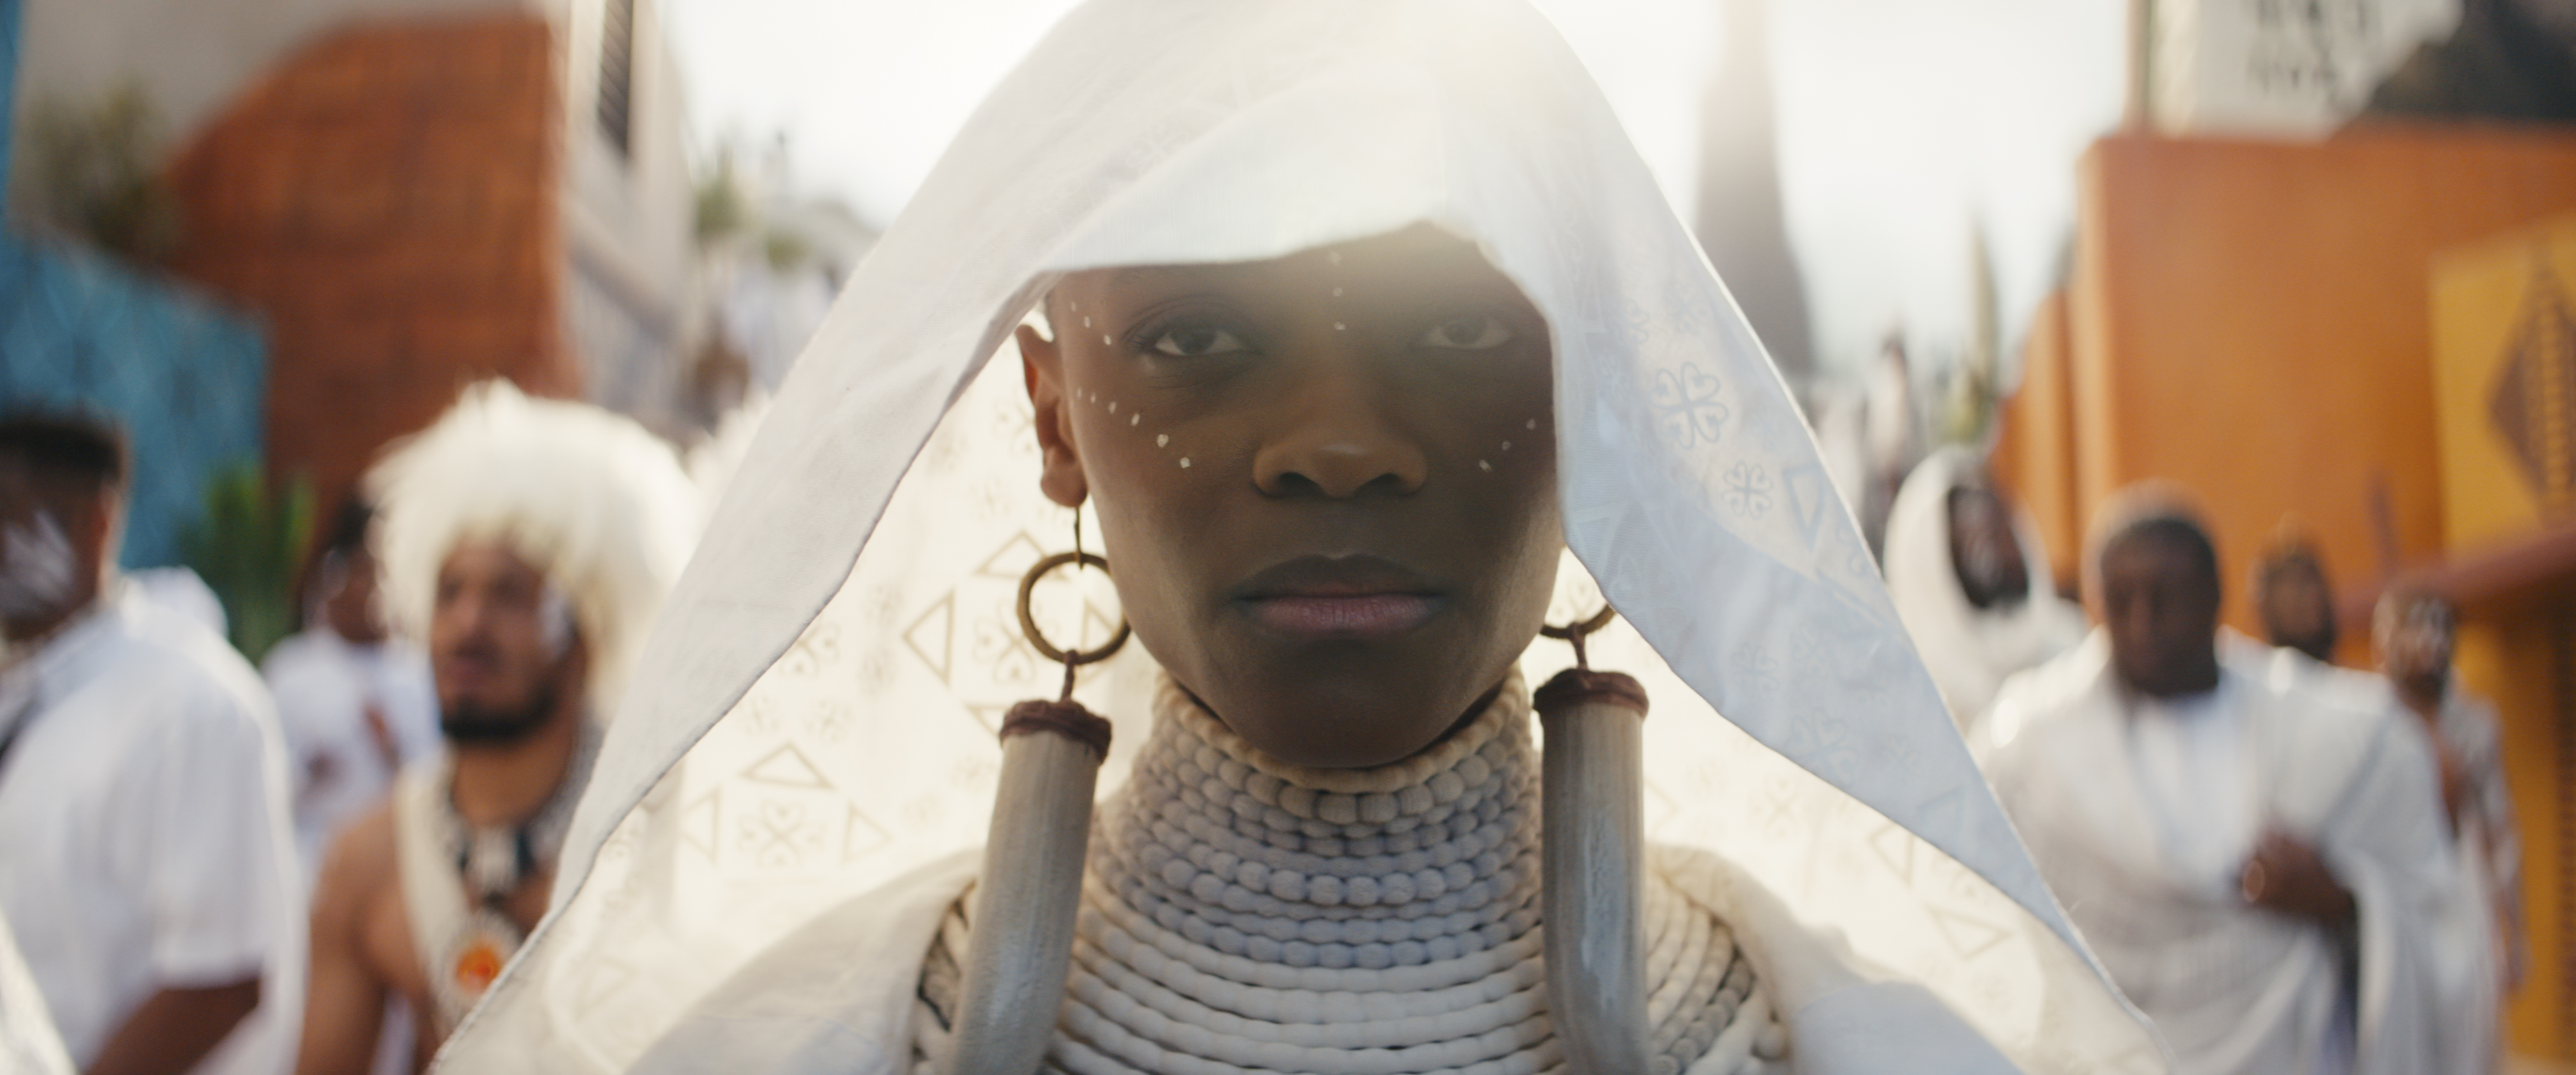 Letitia Wright c <i>Black Panther: Wakanda Forever</i> (Marvel Studios)” class=”fix-layout-shift”/><br />
                                </source></source></source></picture>
</figure>
<div class=